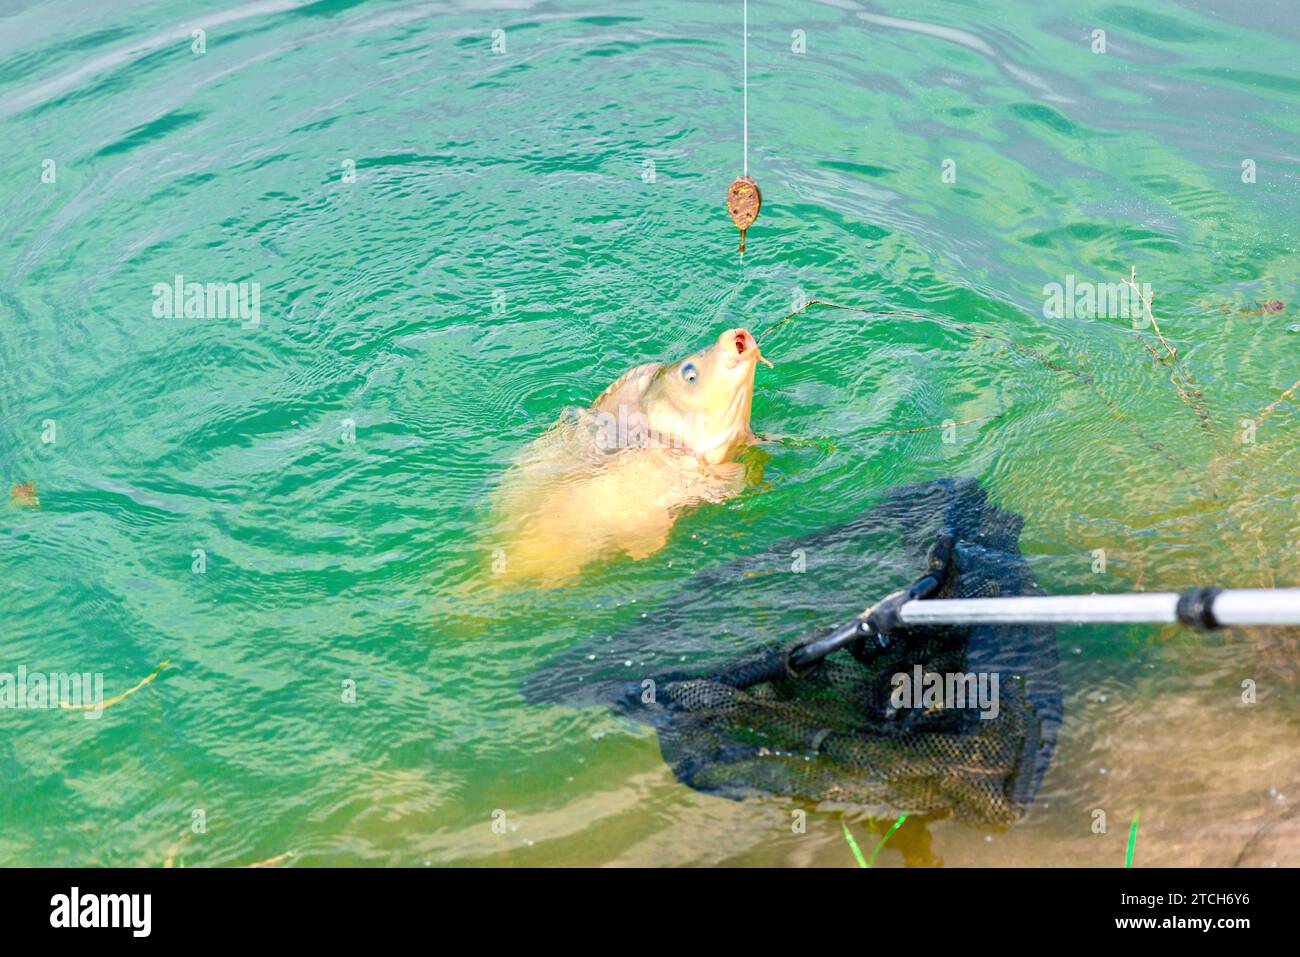 Carp caught on a fishing rod in the water of Lake. Stock Photo